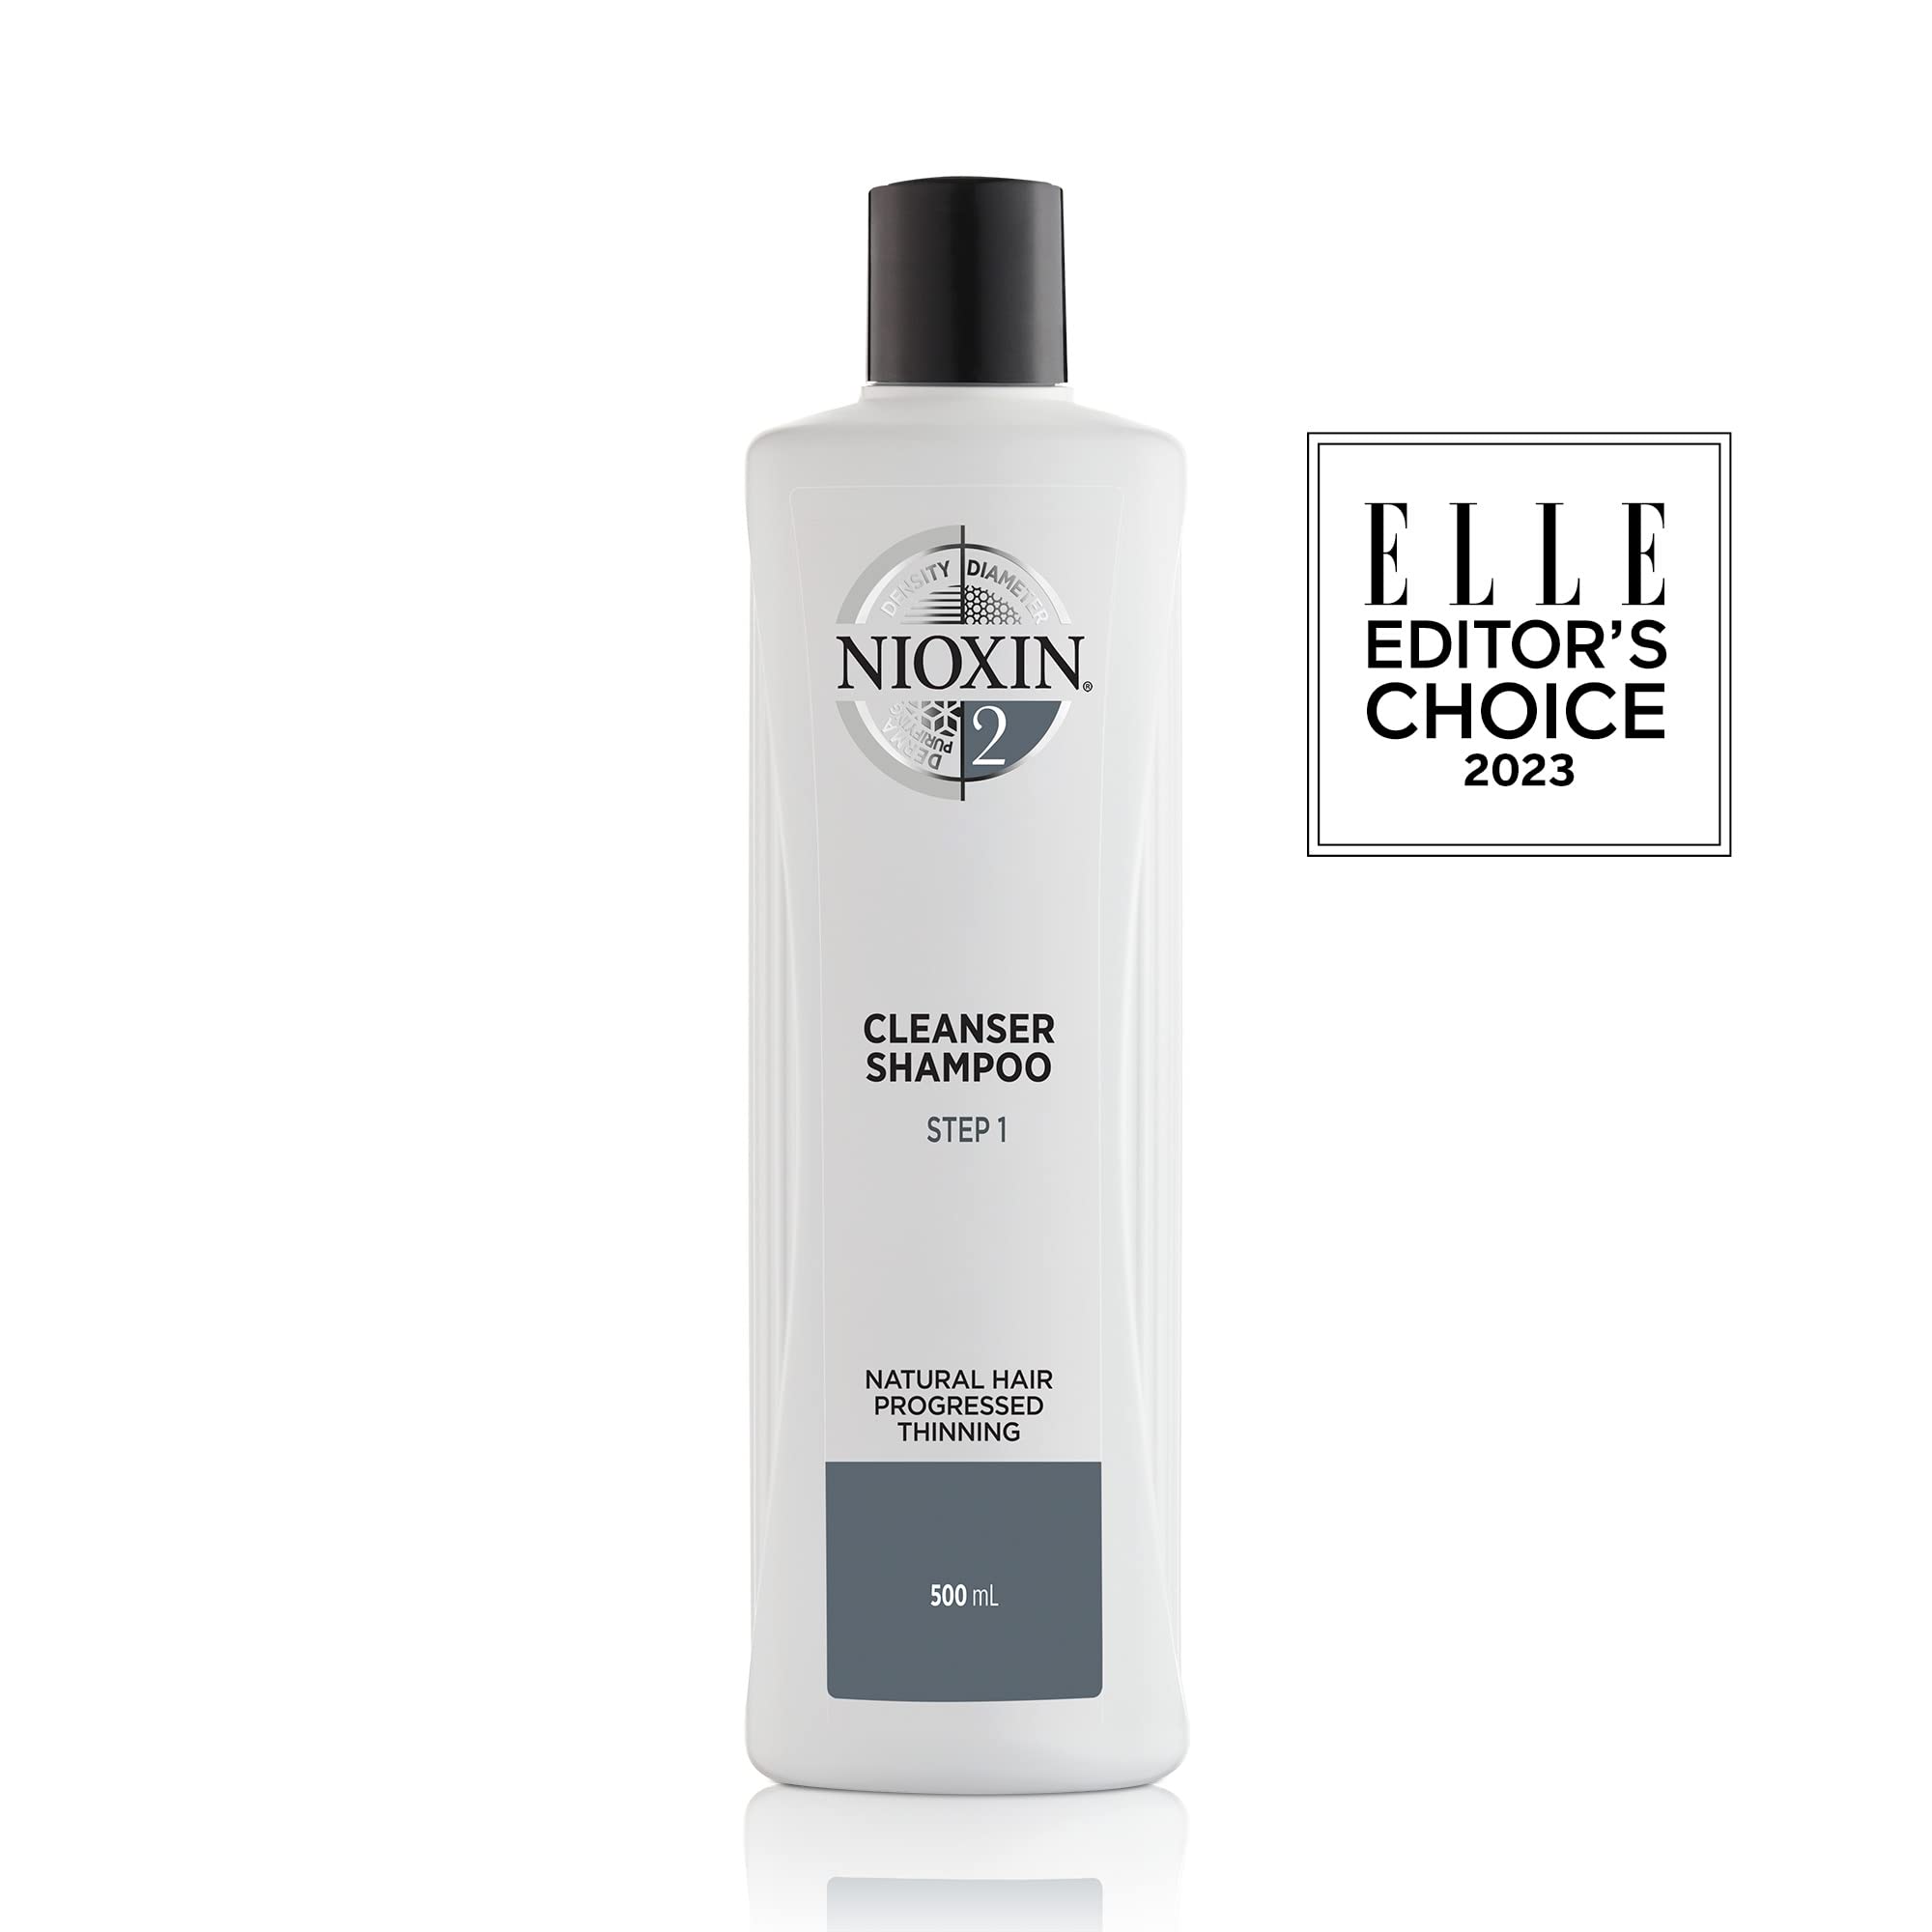 Nioxin System 2, Cleansing Shampoo With Peppermint Oil, Treats Sensitive Scalp & Provides Moisture, For Natural Hair with Progressed Thinning, Various Sizes